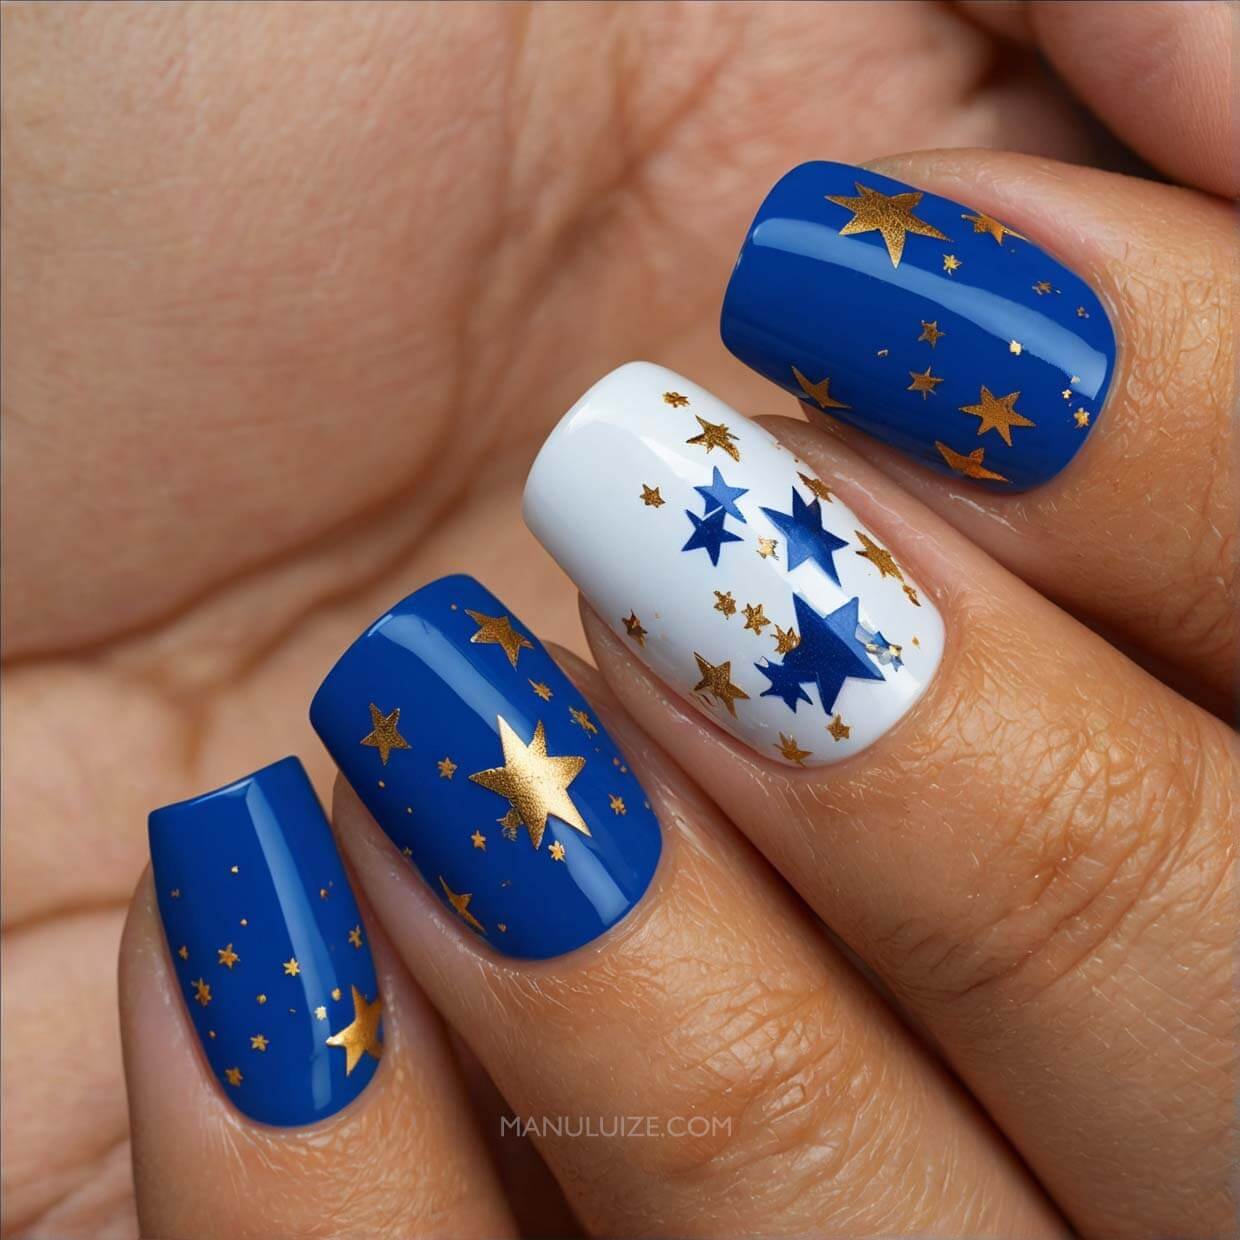 Starry nails